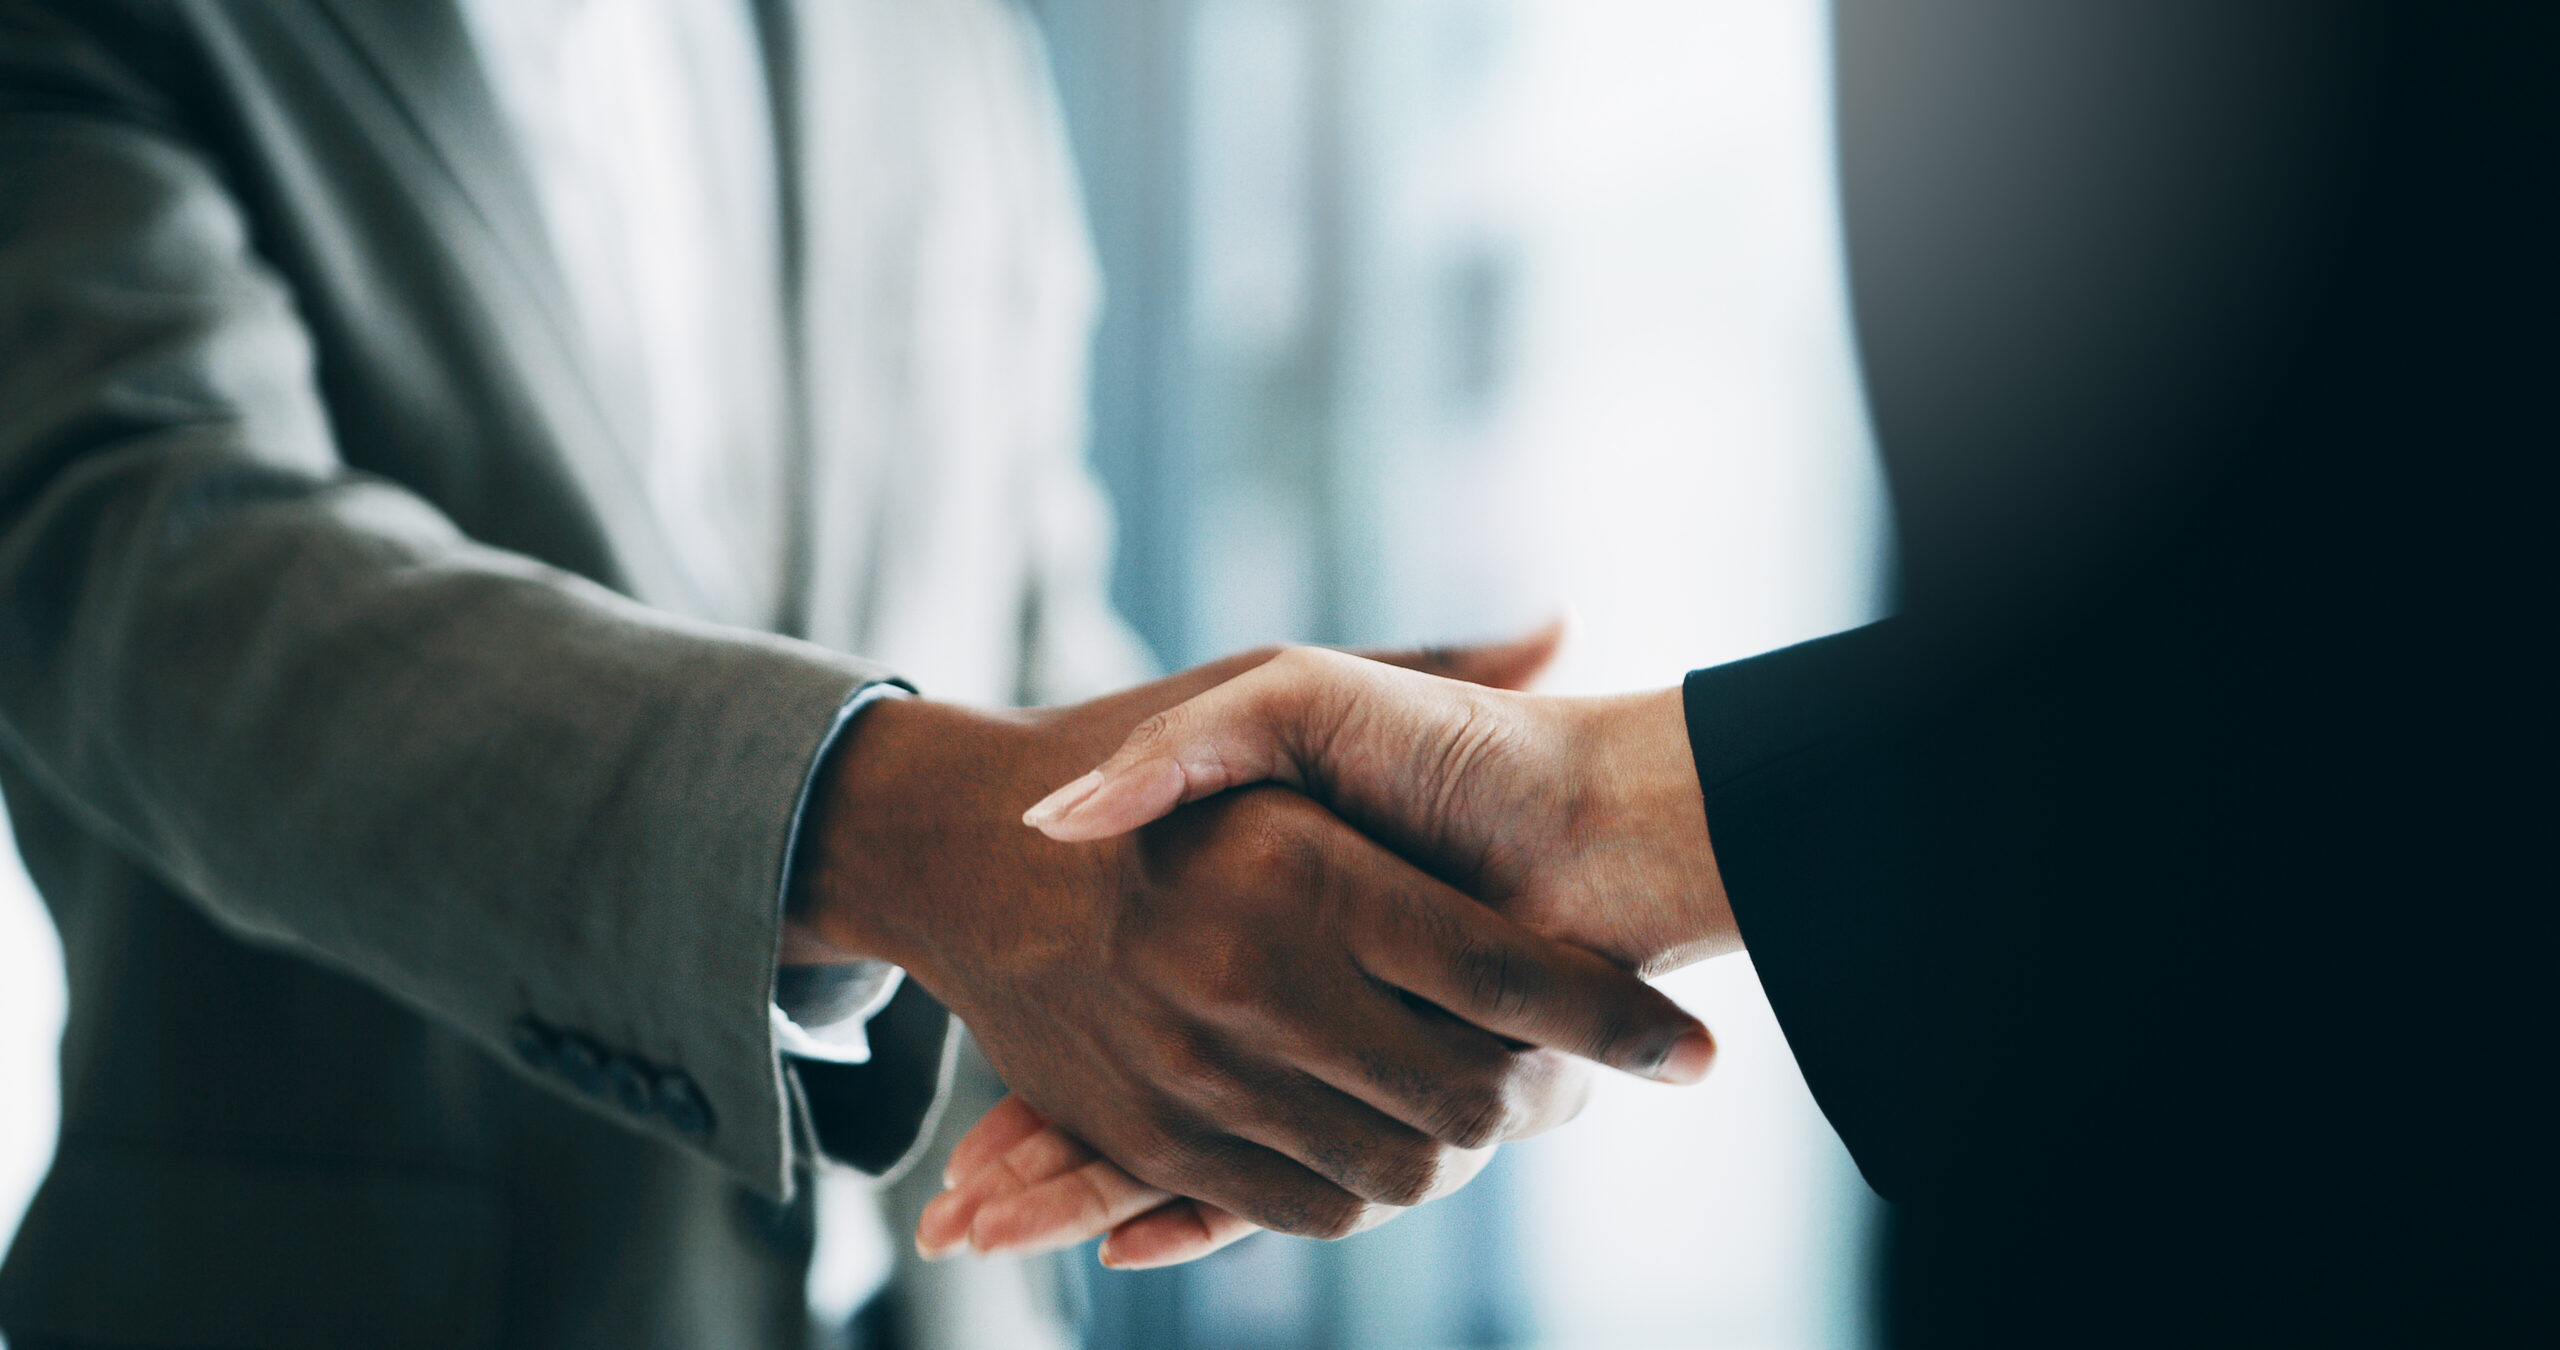 Two business professionals shaking hands in a formal setting, with a focus on their clasped hands.